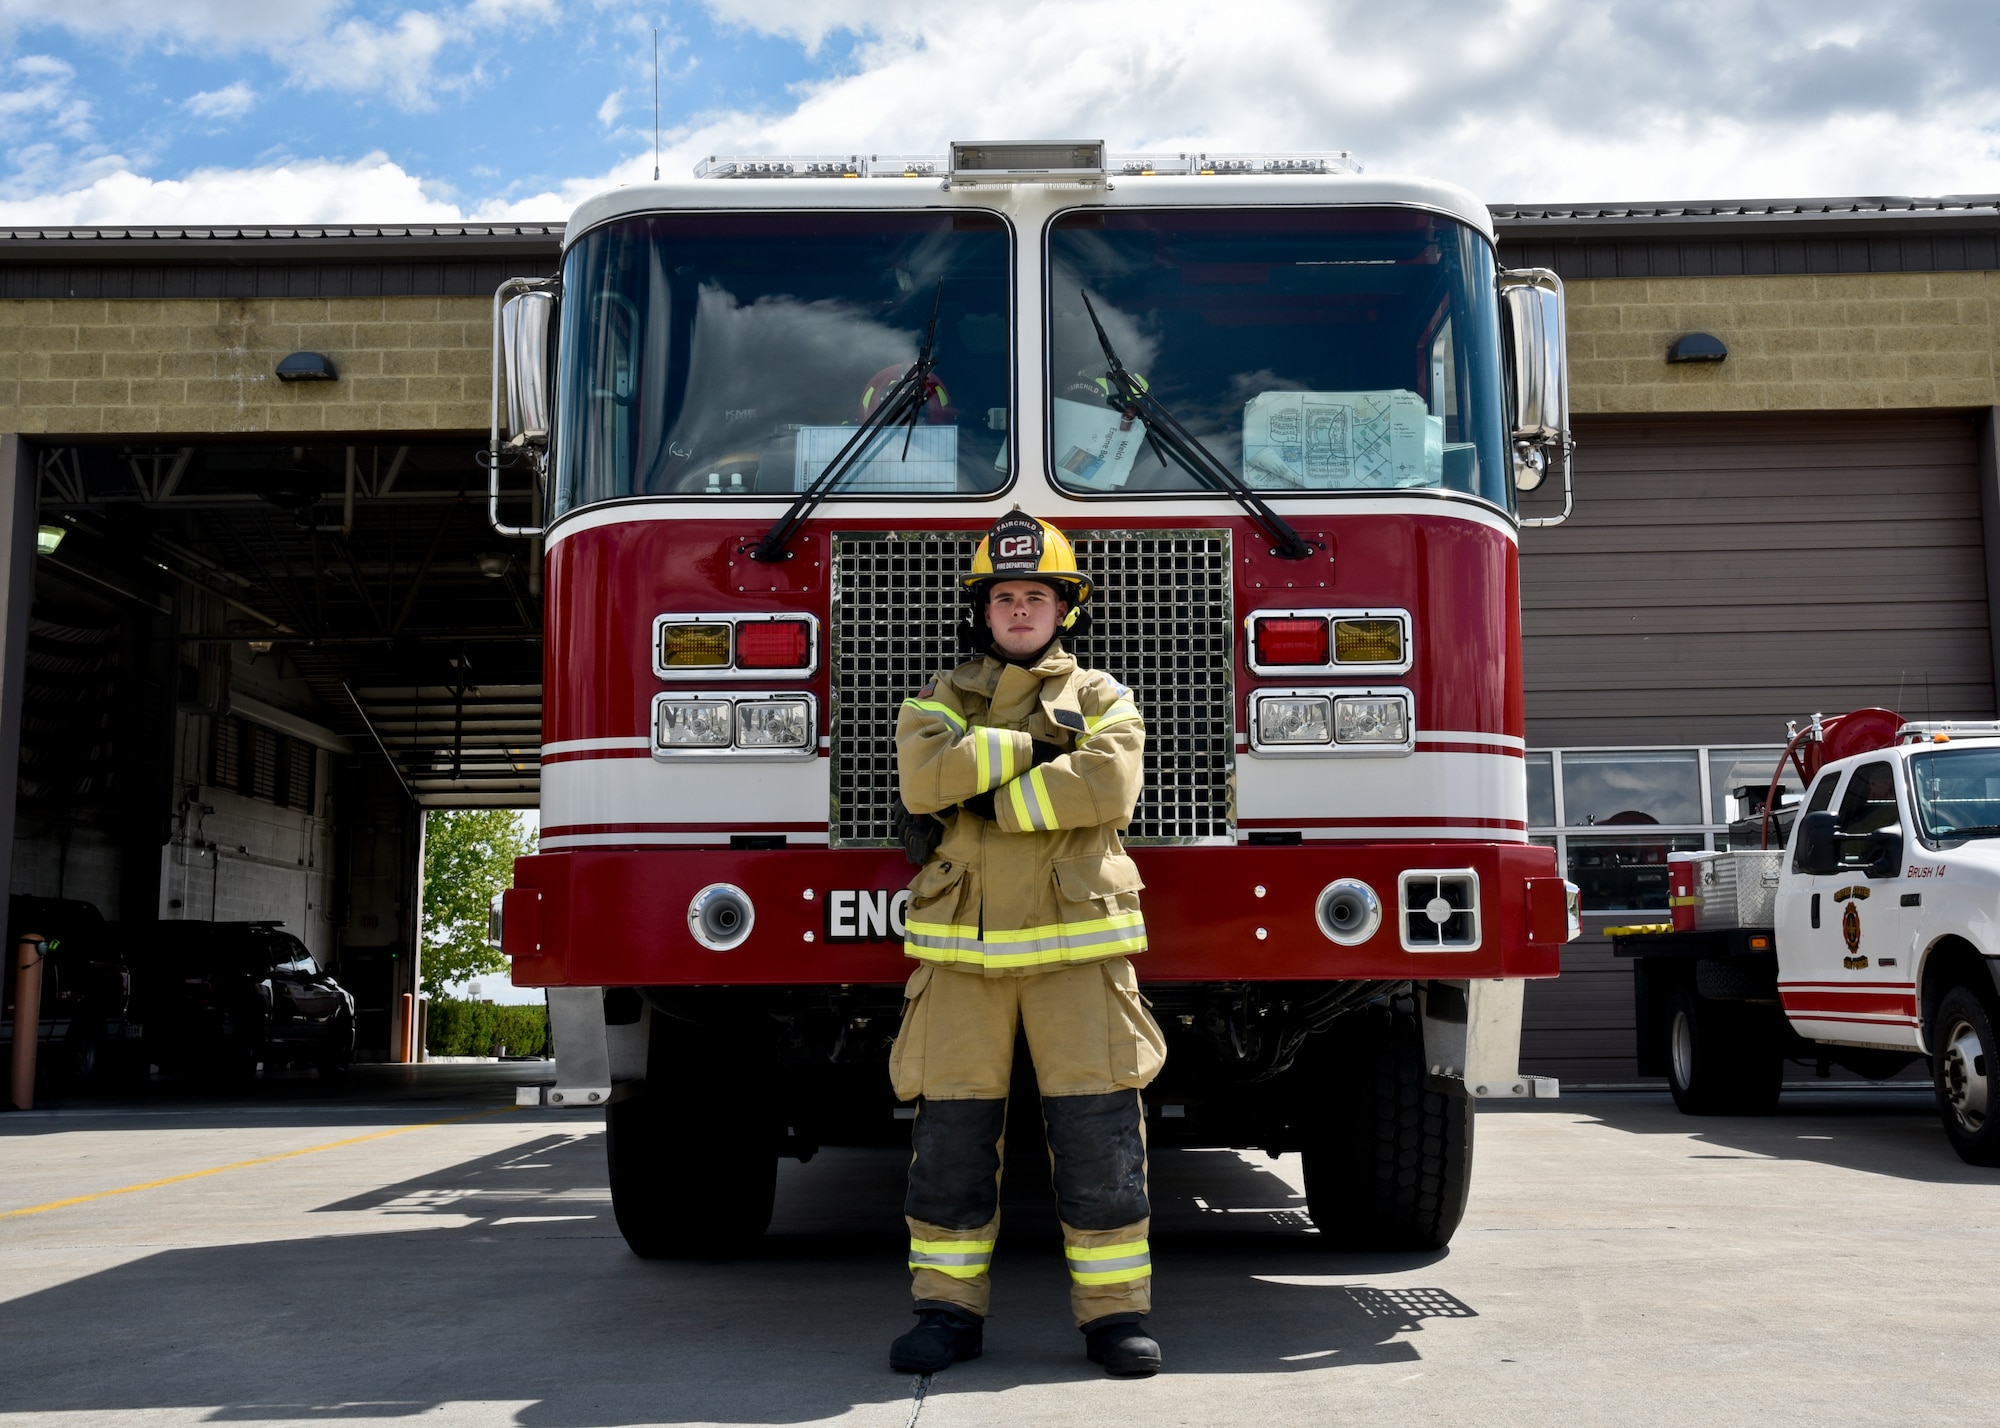 Airman 1st Class Shawn Mercer, 92nd Civil Engineer Squadron firefighter, stands proudly in front of a fire engine May 25, 2016, at Fairchild Air Force Base, Wash. Fire Protection specialists deal with everything from brush fires to burning rocket fuel and hazardous material fires. After the initial 7.5 weeks of Basic Military Training, Airmen who want to be firefighters will attend Goodfellow Air Force Base, Texas for five months of basic firefighting skills. “My uncle was a firefighter and I loved hearing his stories,” Mercer said. “I went along with the volunteer firefighters from my town a few times to watch and knew it is what I wanted to do.” (U.S. Air Force photo/Airman 1st Class Taylor Shelton)